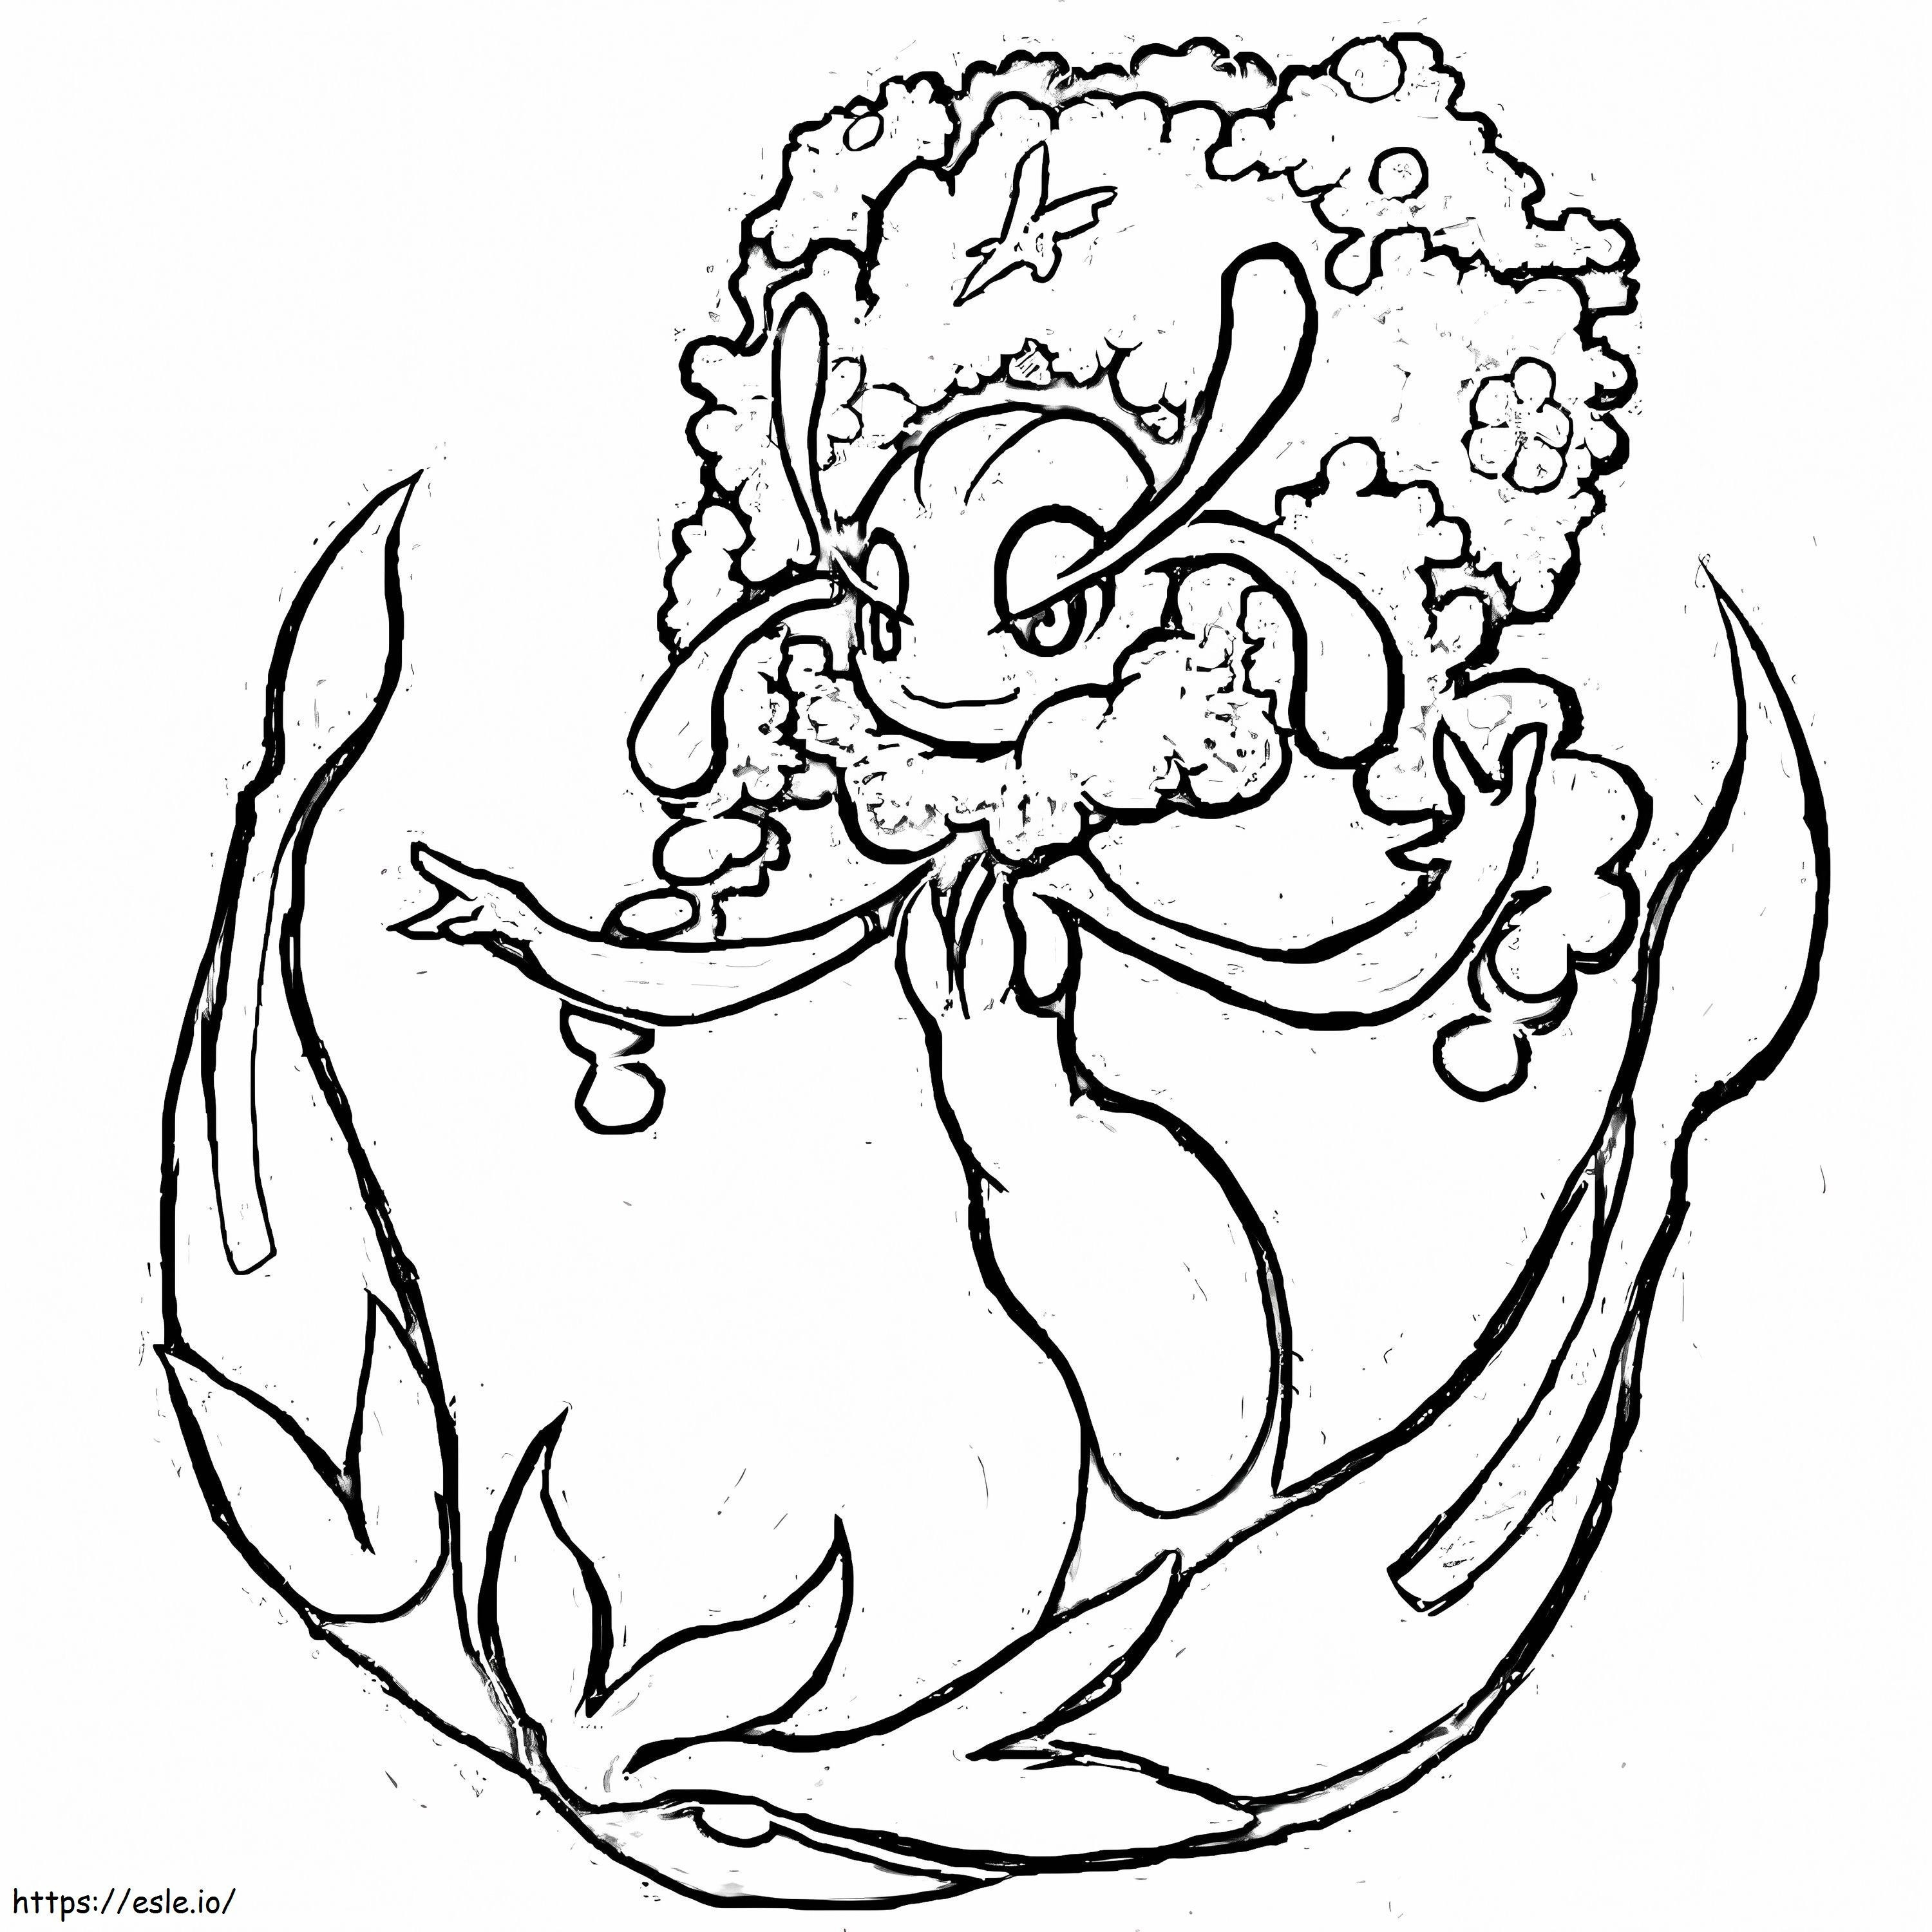 Lovely Florges coloring page